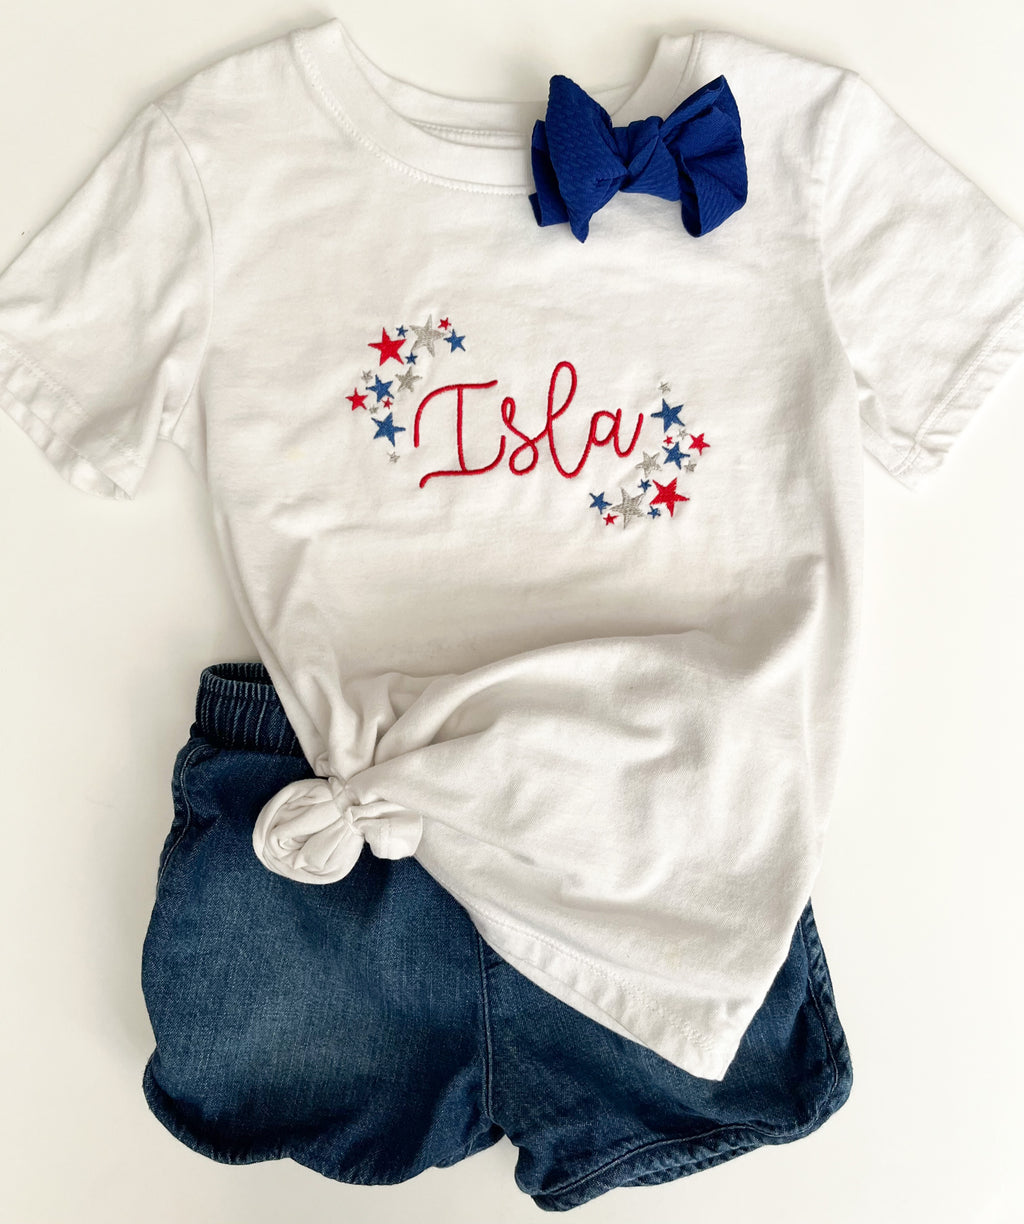 Double Star Wreath with Name Shirt